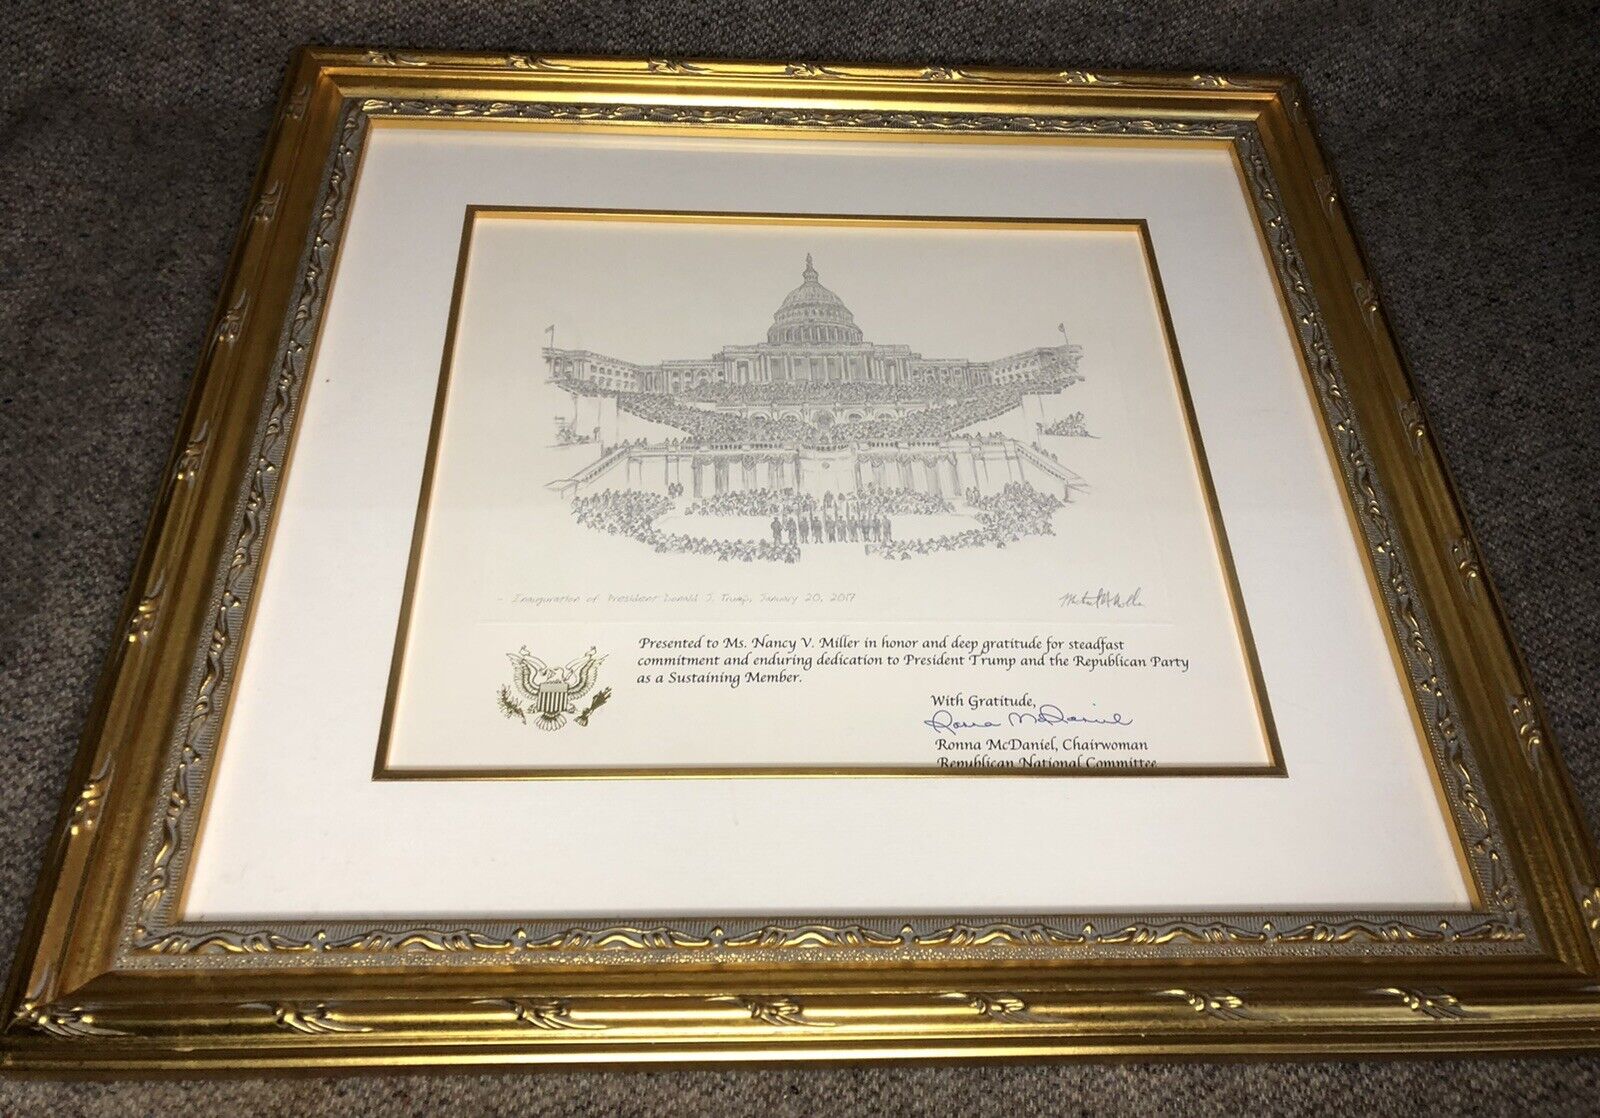 RARE Donald Trump Inauguration Day Sketch Print Framed Signed By Ronna McDaniel